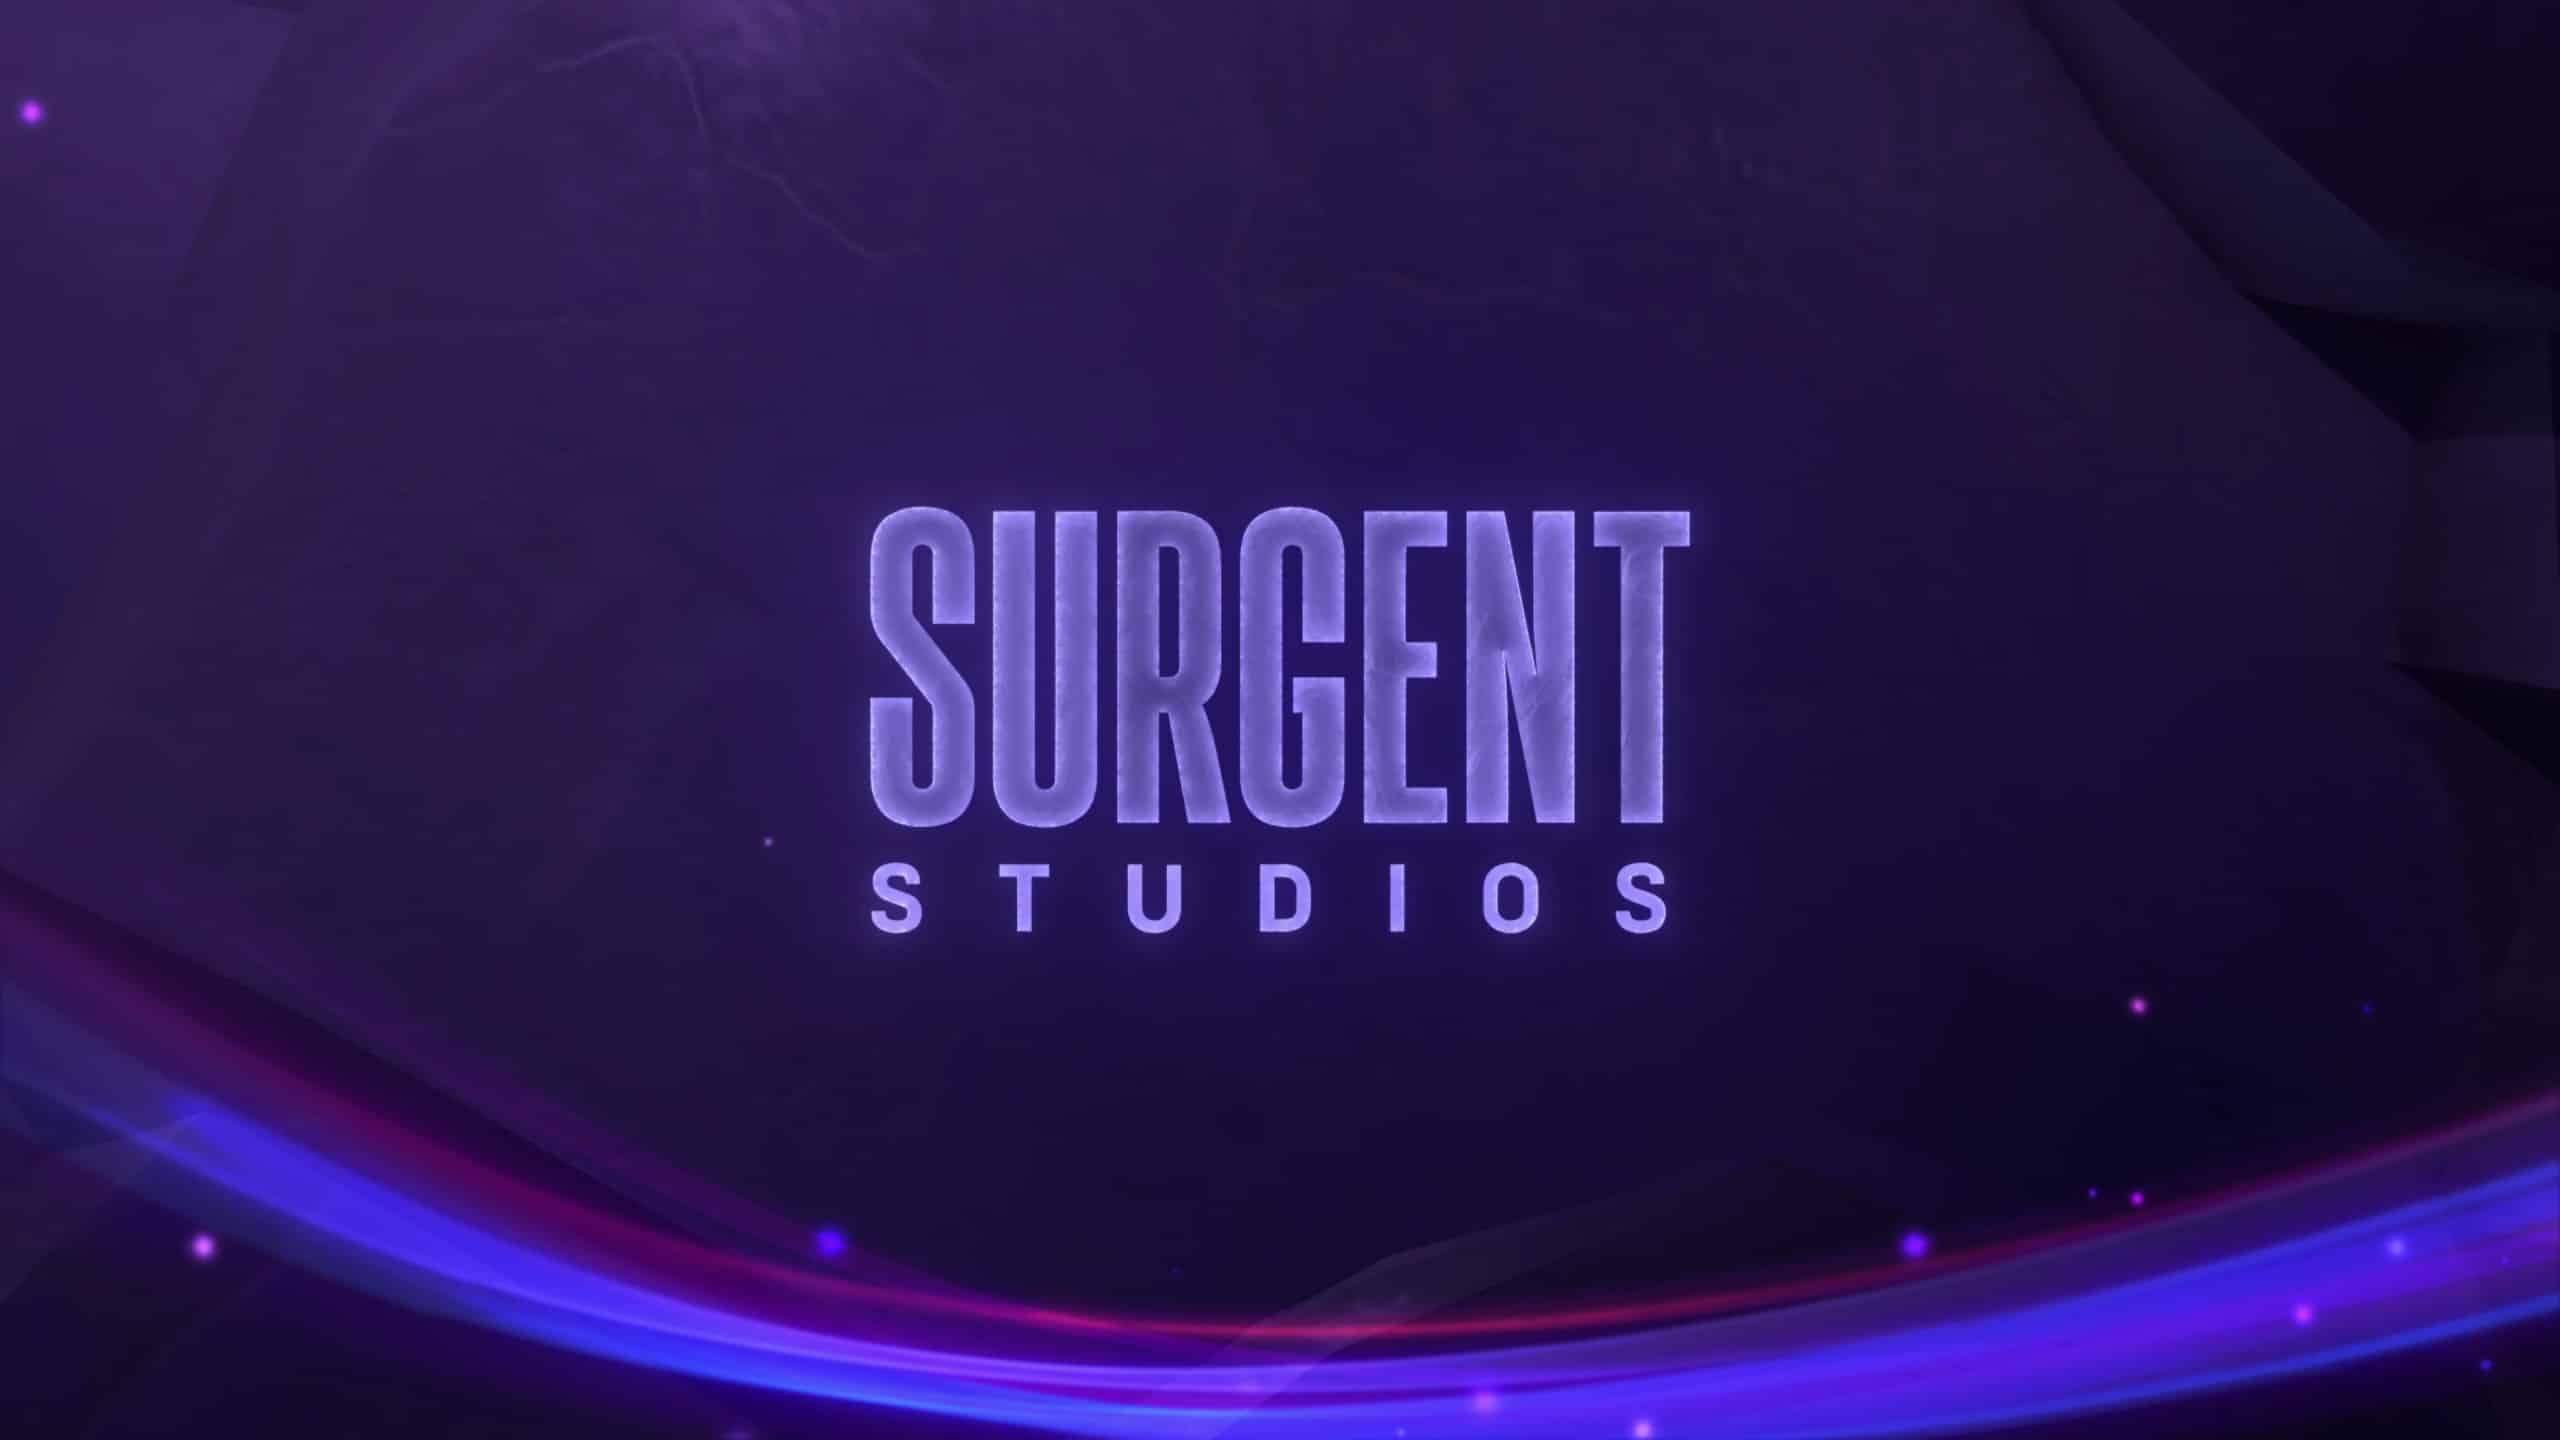 The Surgent Studios logo in Tales of Kenzera: ZAU | Image captured by Kirstin BaumGaming industry layoffs